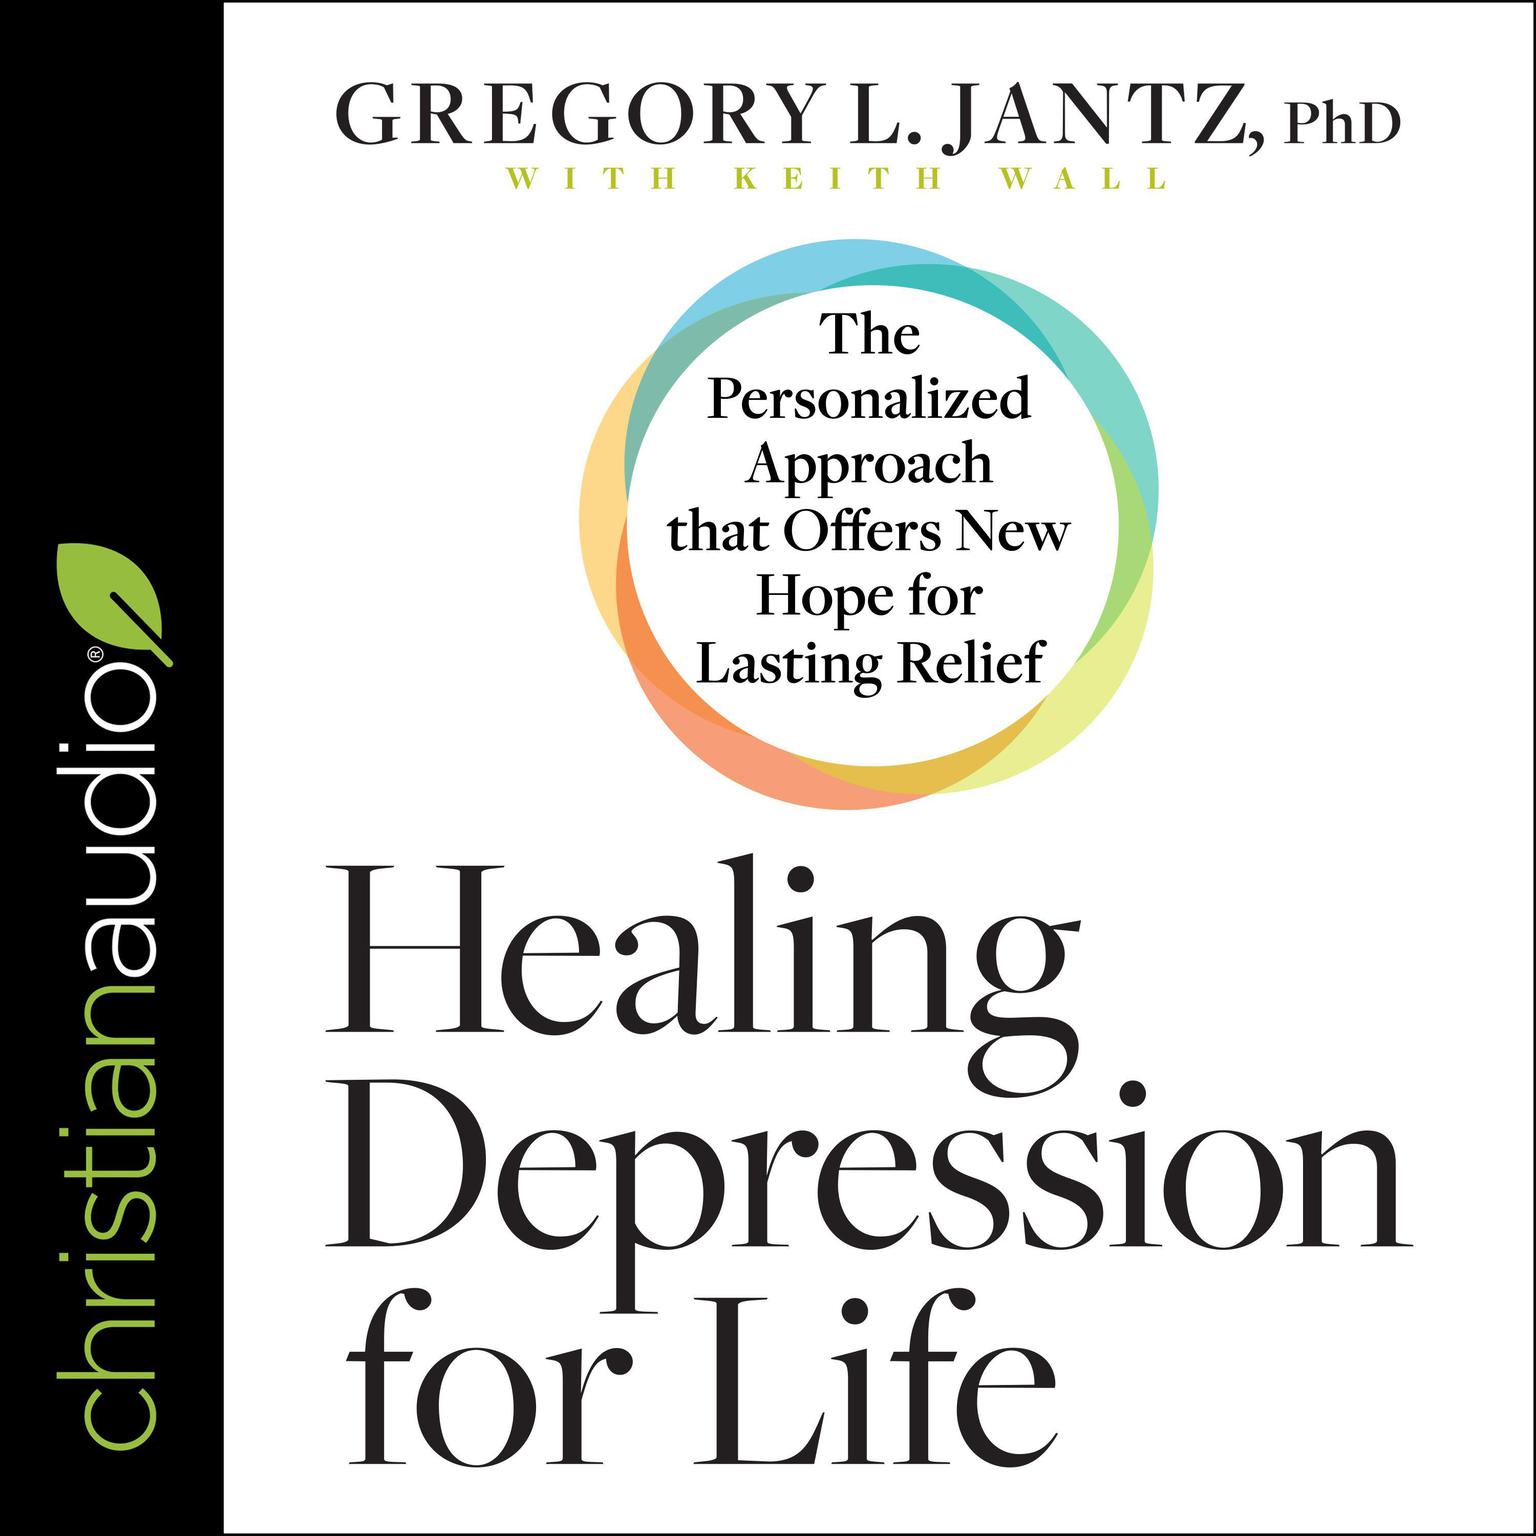 Healing Depression for Life: The Personalized Approach that Offers New Hope for Lasting Relief Audiobook, by Gregory L. Jantz